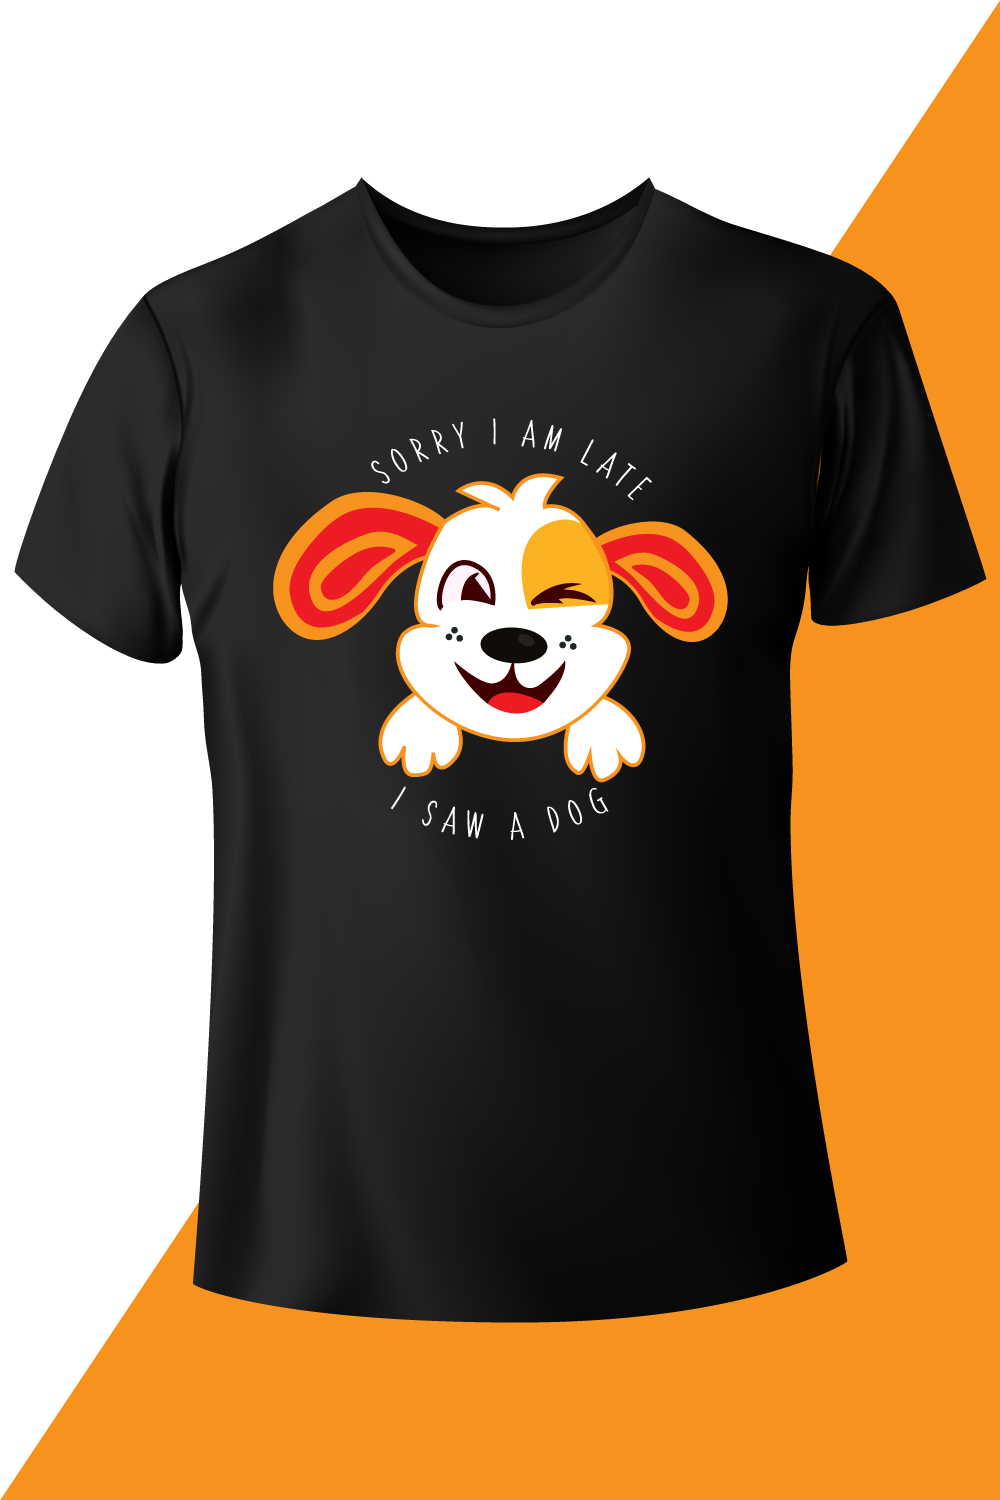 Image of a black t-shirt with a gorgeous dog print and lettering.